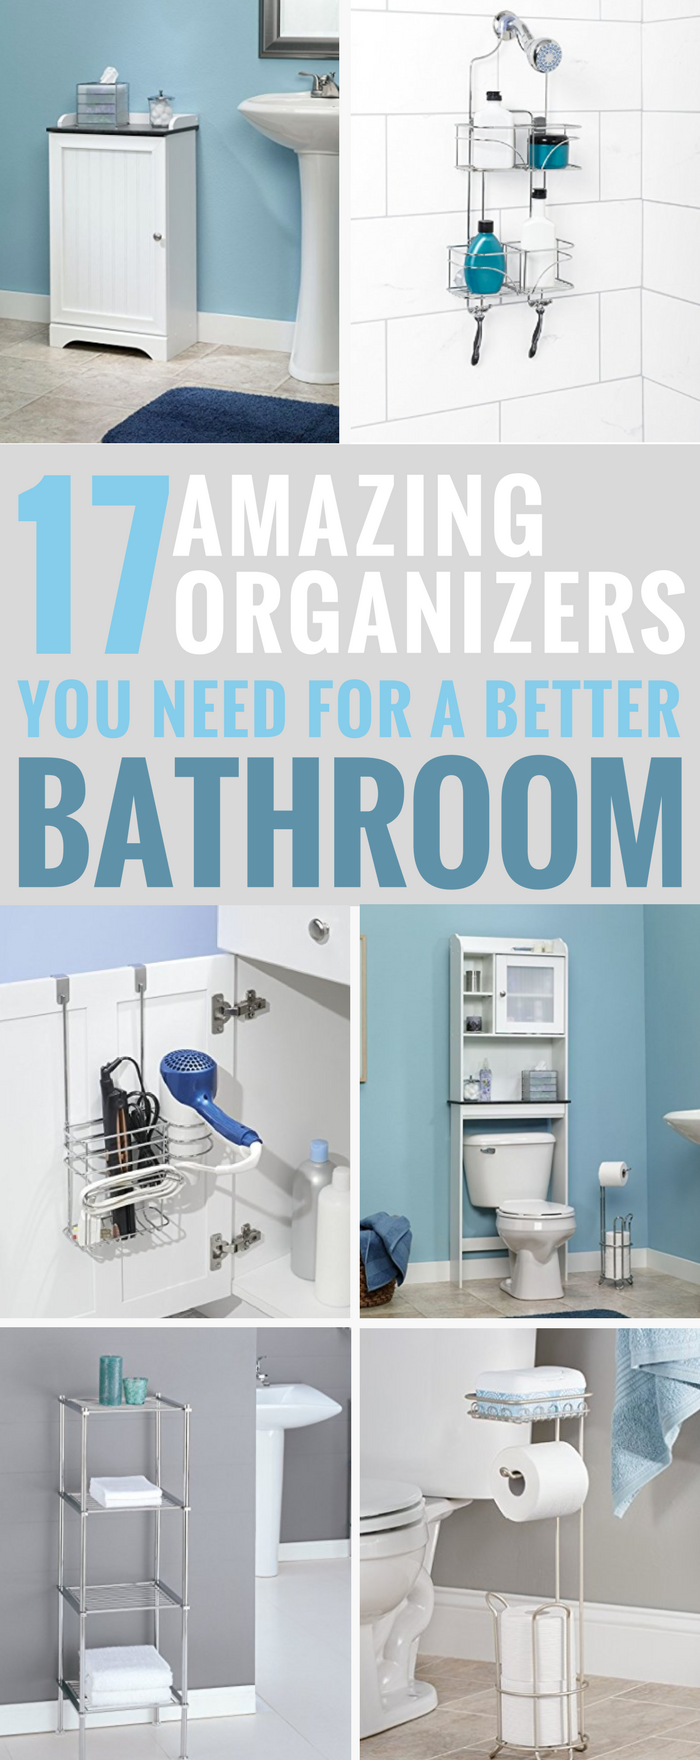 Awesome Bathroom Organizers Storage Ideas for Smaller Spaces to help contain the clutter